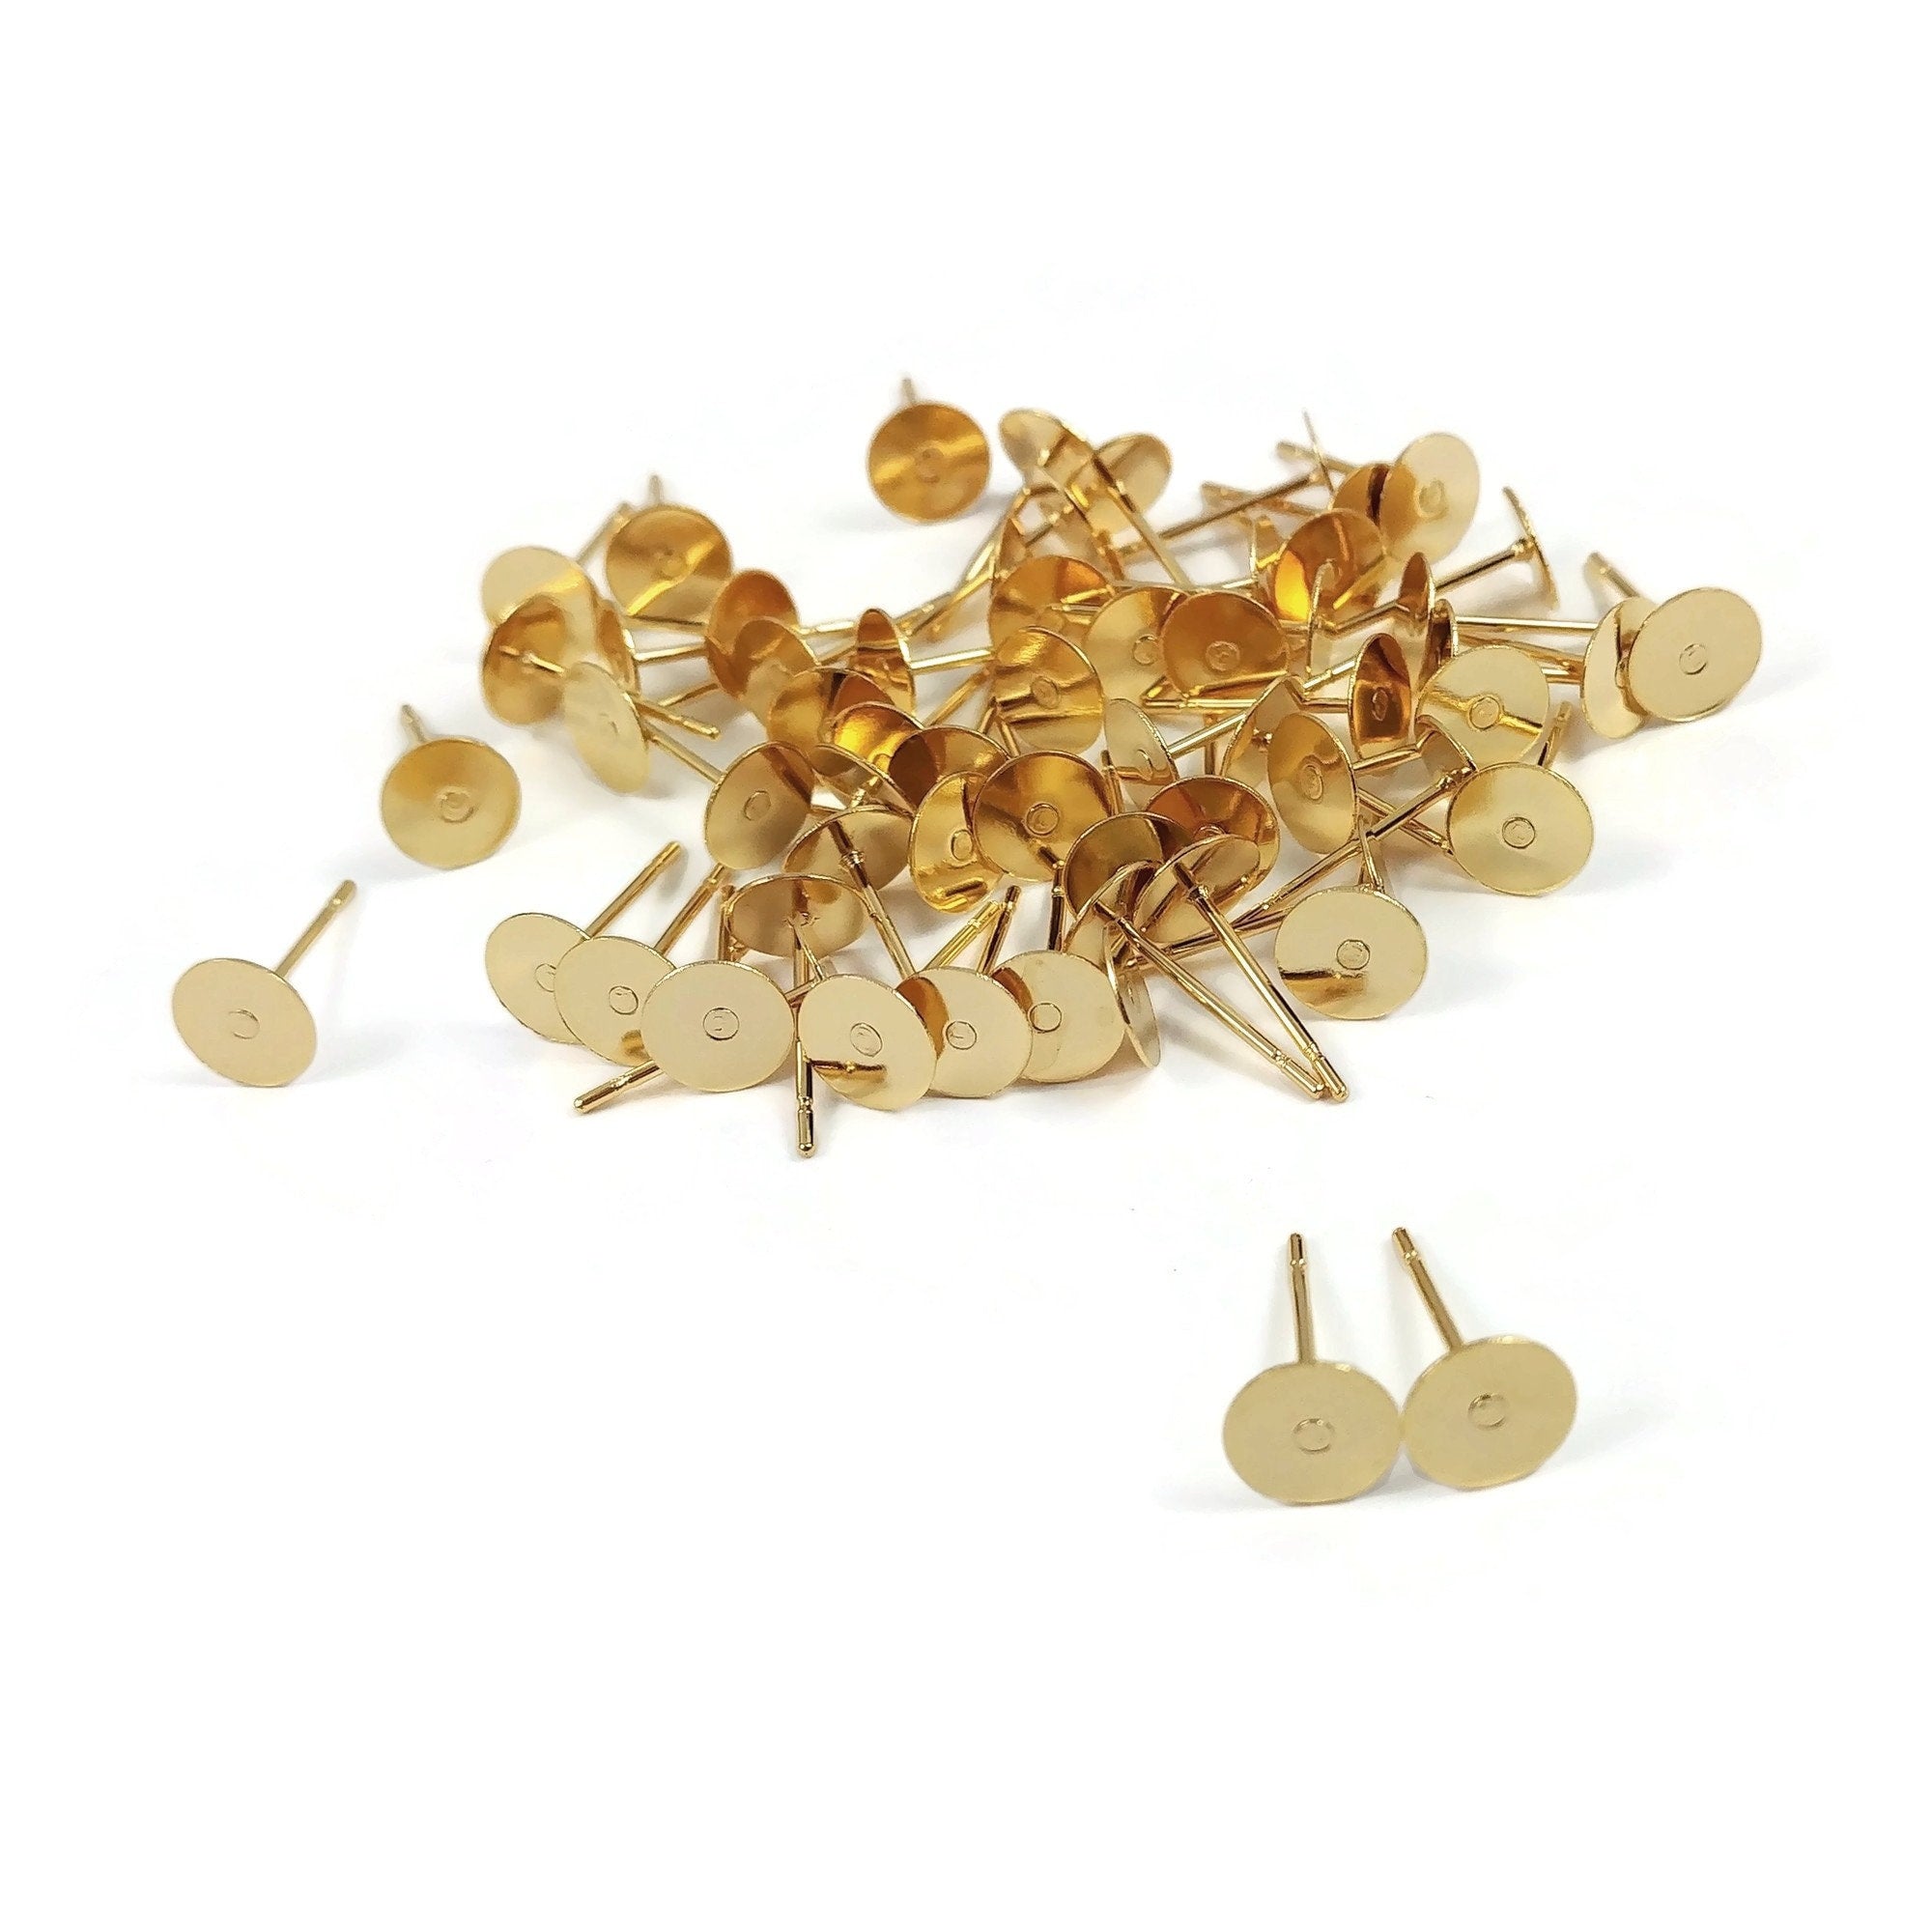 24K gold plated earring post, 6mm stainless steel flat pad studs, 50pcs (25 pairs) blank parts for jewelry making